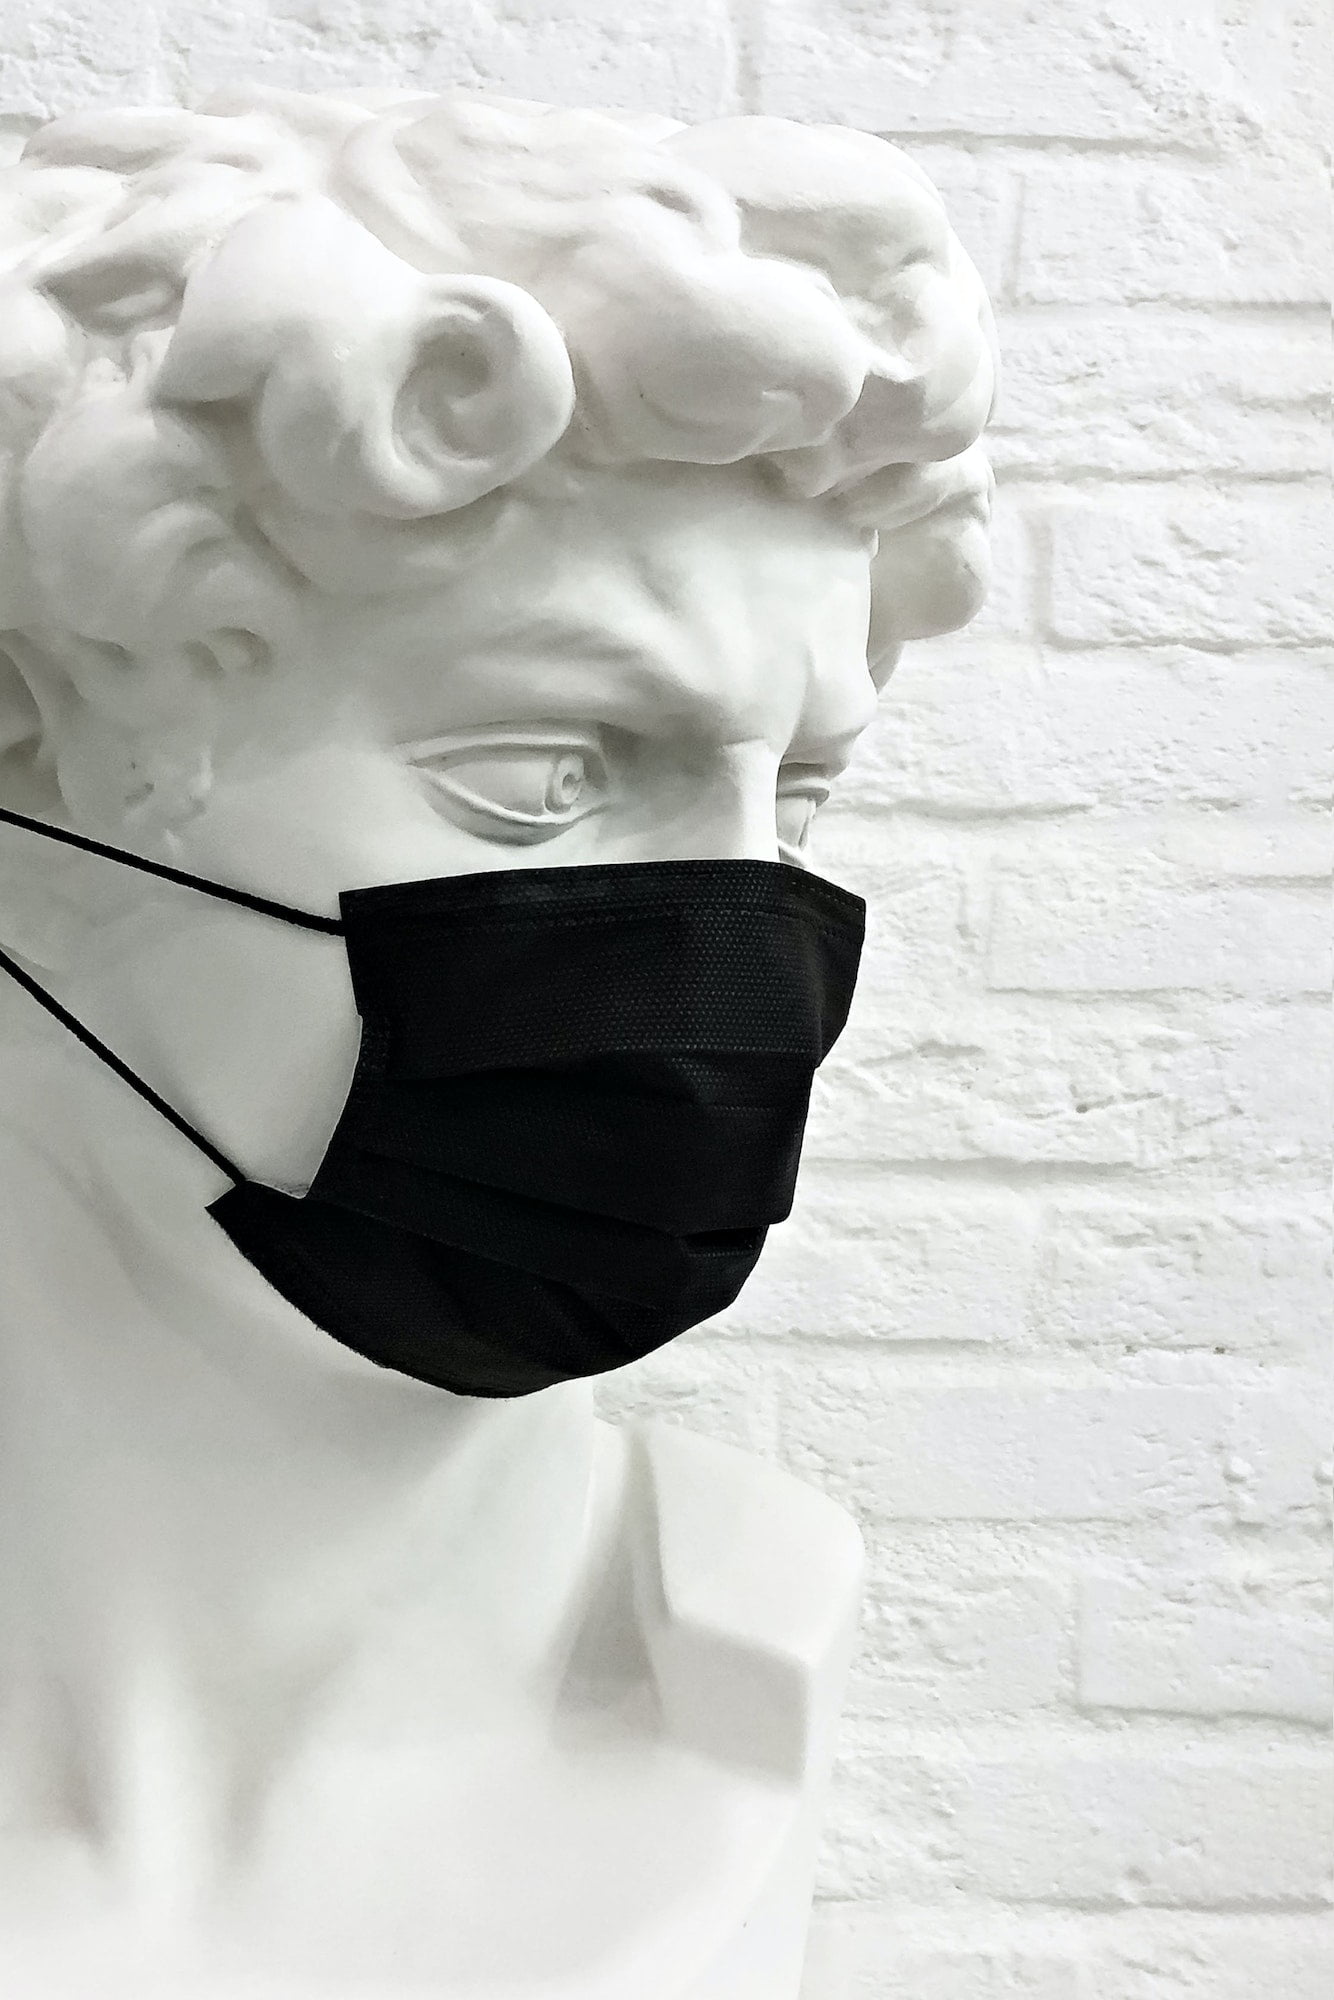 a statue with a medical protective mask concept of the coronavirus pandemic